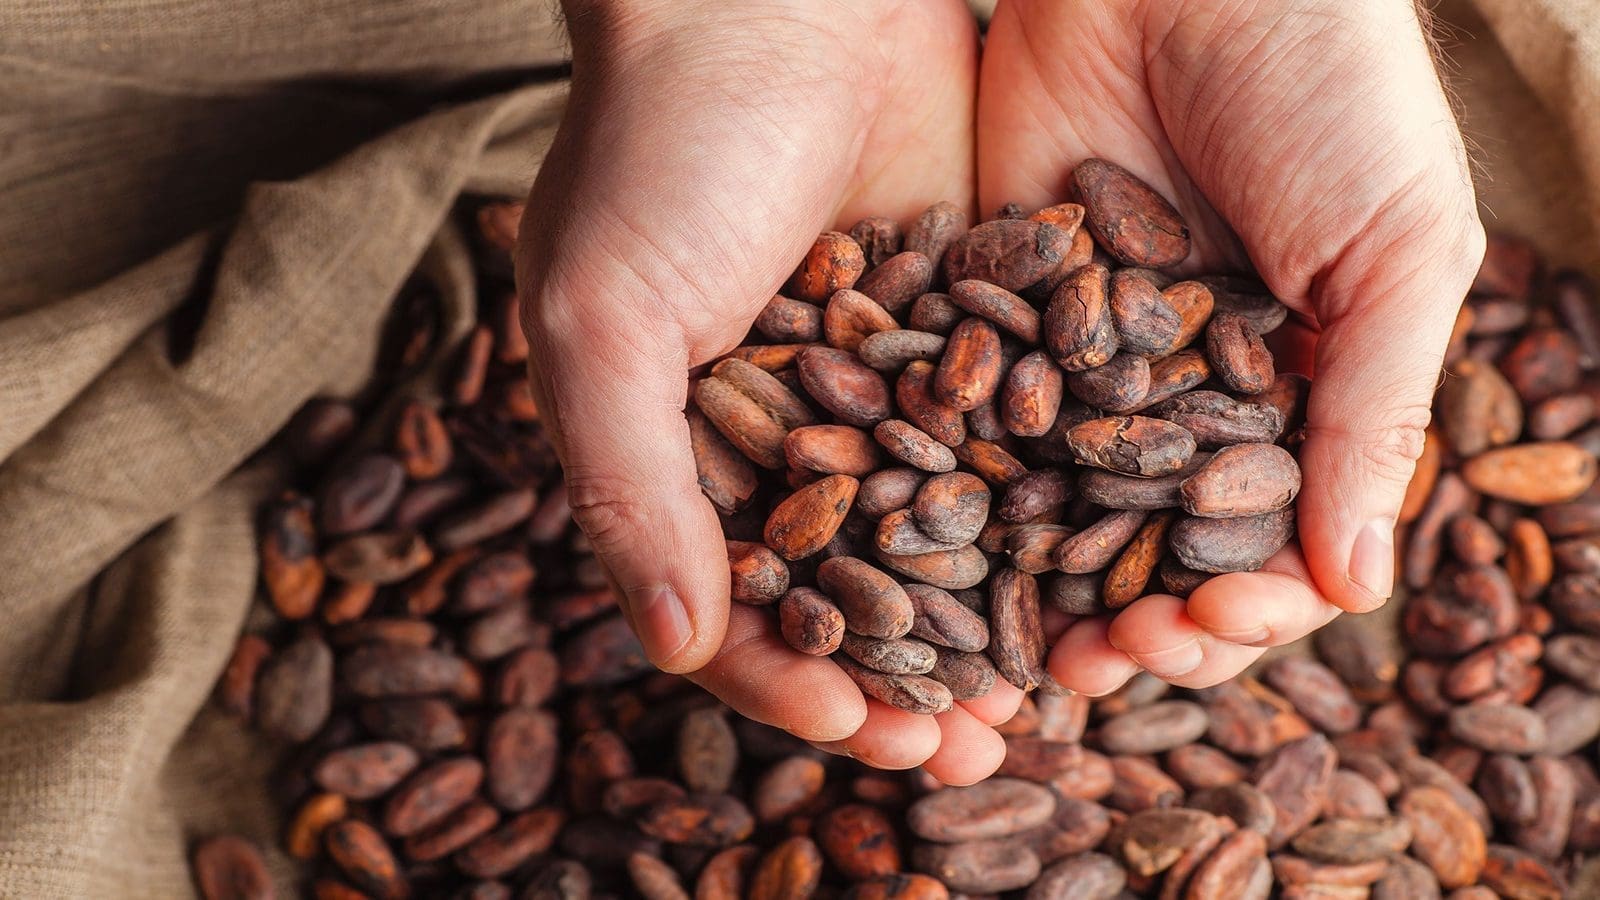 Cameroon’s cocoa sector faces challenges amidst production decline